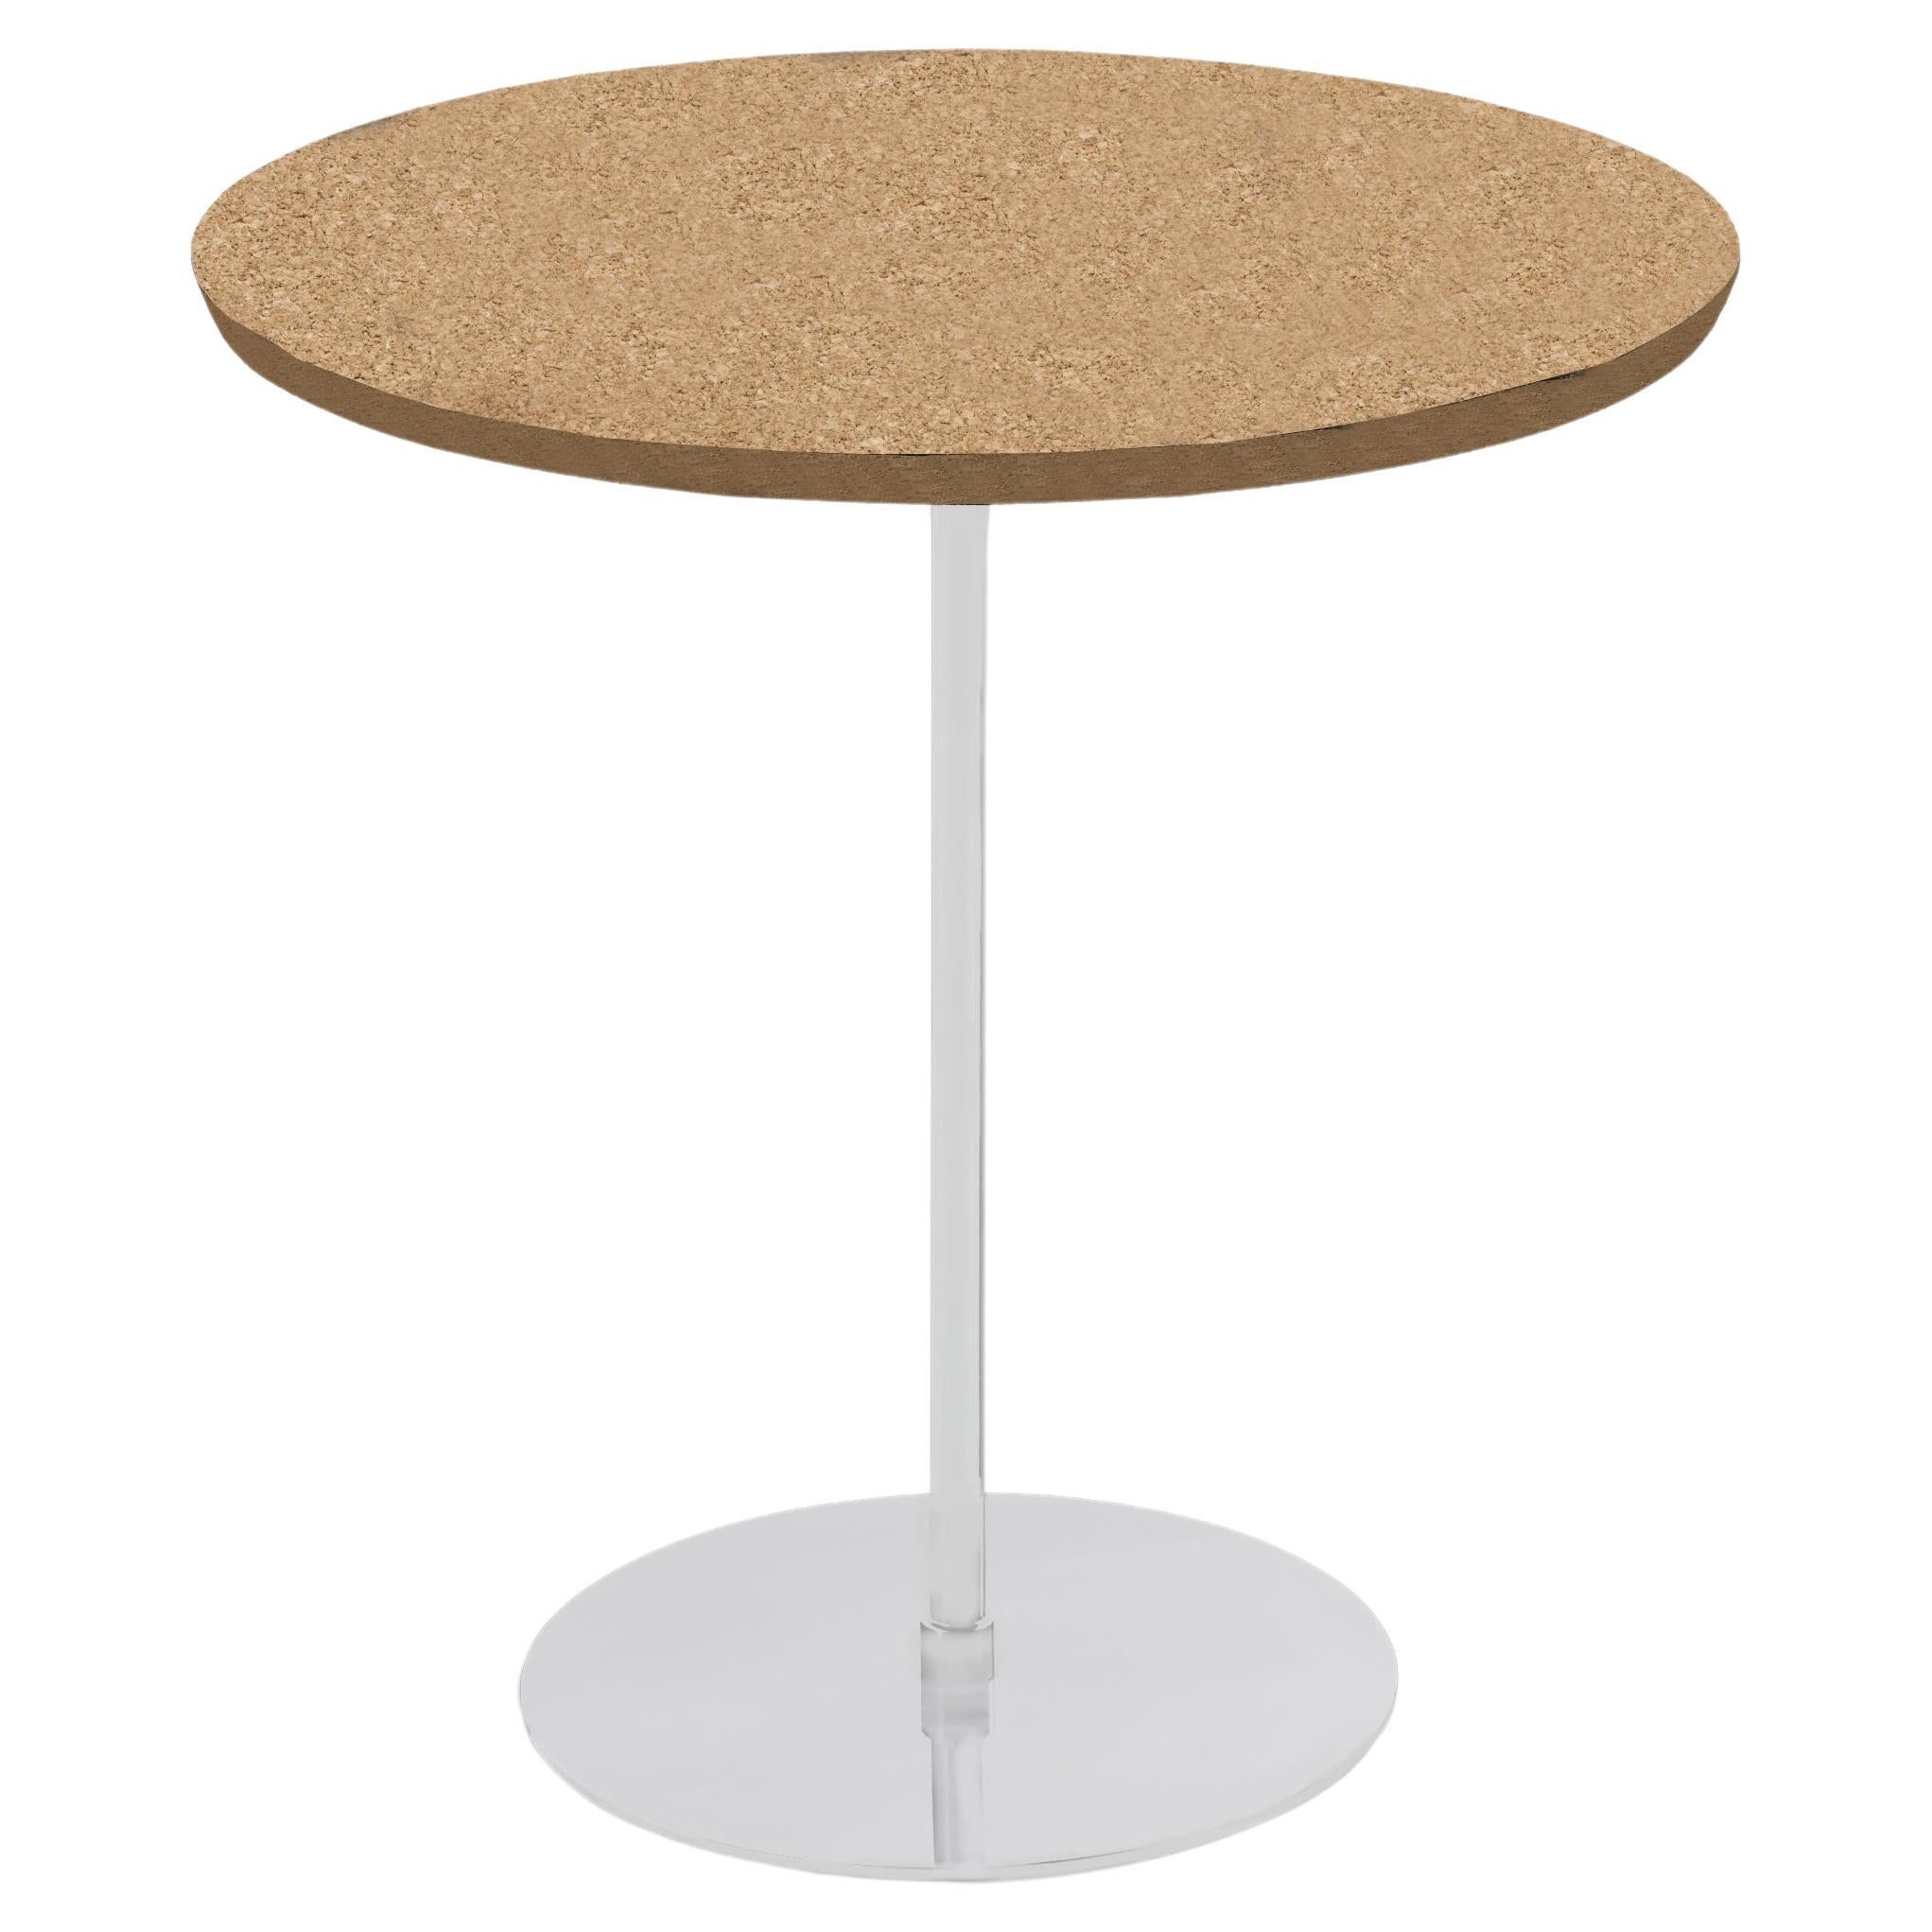 ADDITIONAL DISK TABLE
The disco side table is lightweight and versatile, it looks great combined with the disco side table. Its top can be in natural cork or black rubberized cork and the finishes vary between brass, nickel and onyx, all